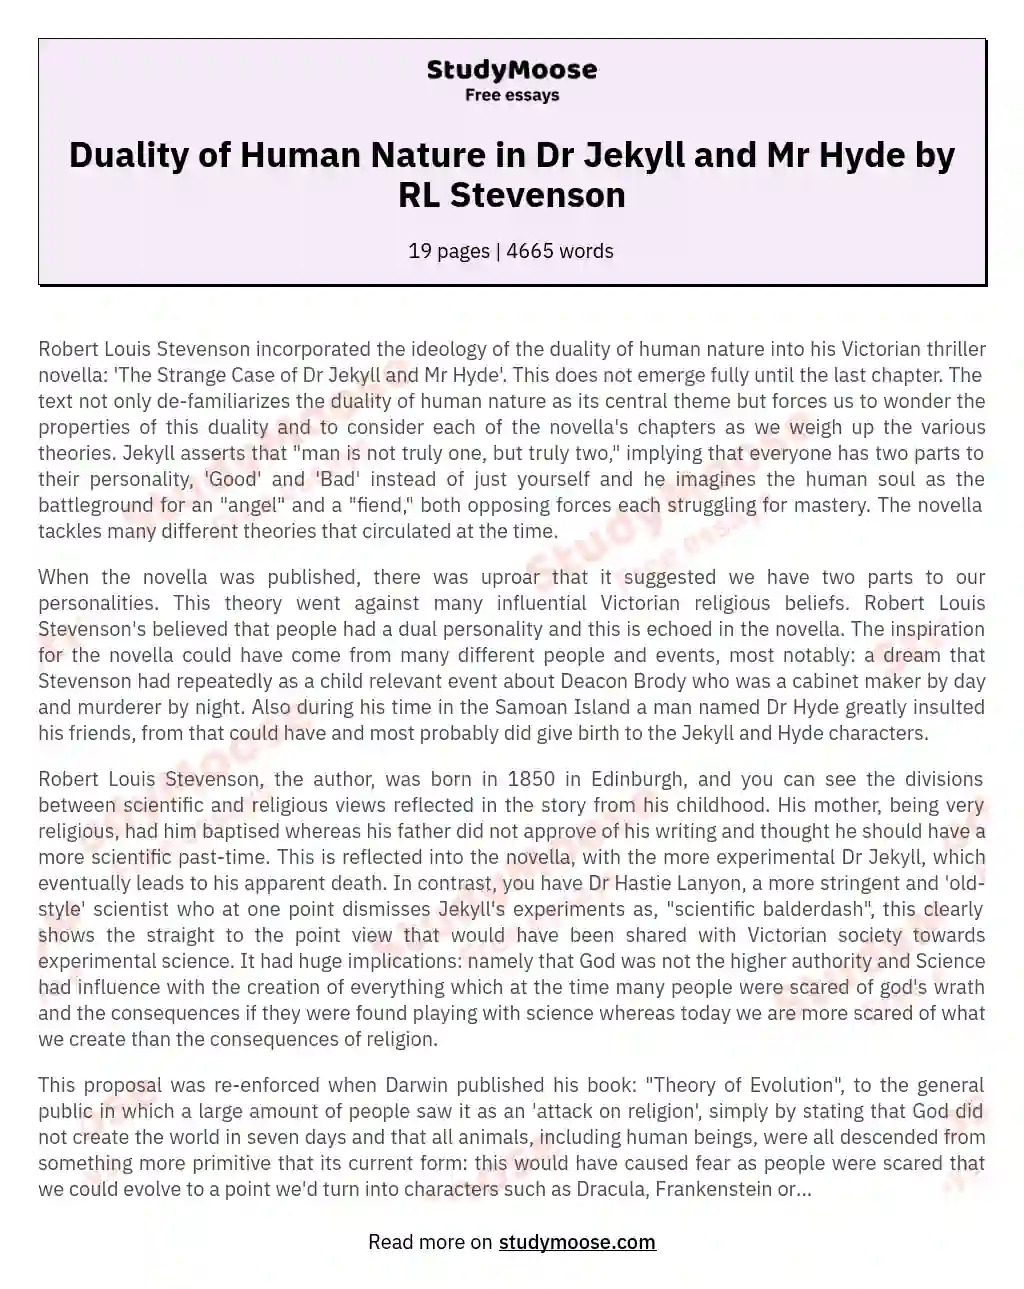 How does Robert Louis Stevenson explore the duality of human nature in Dr Jekyll and Mr Hyde?